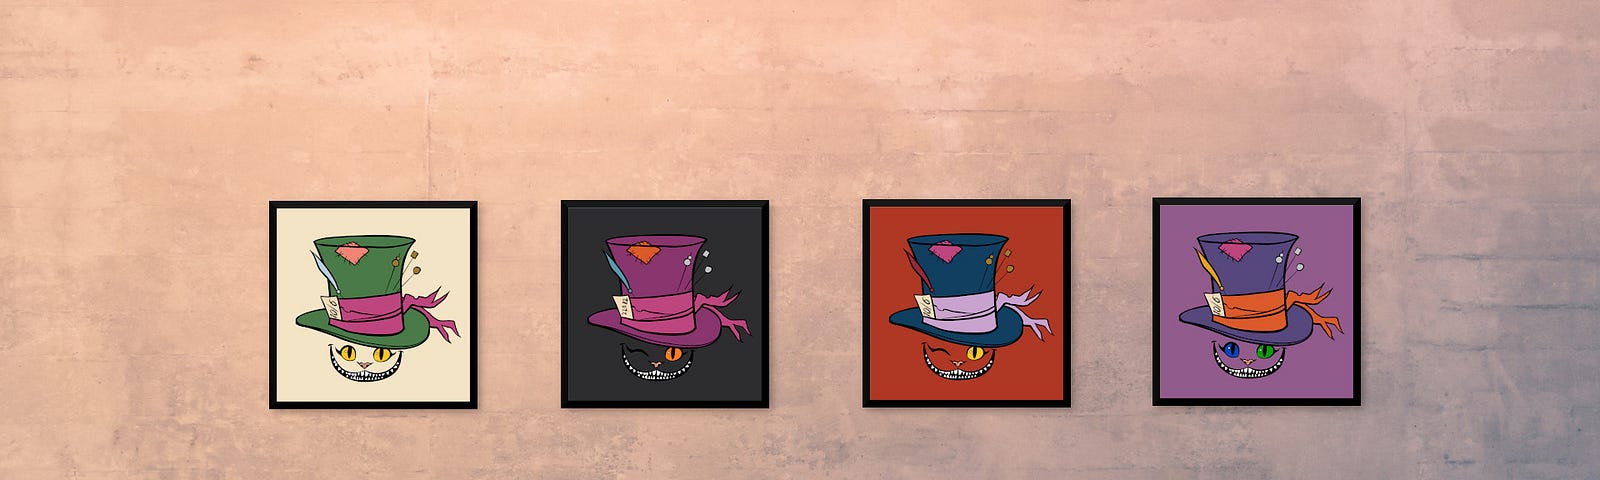 Four digital paintings of cats wearing hats hanging on a wall